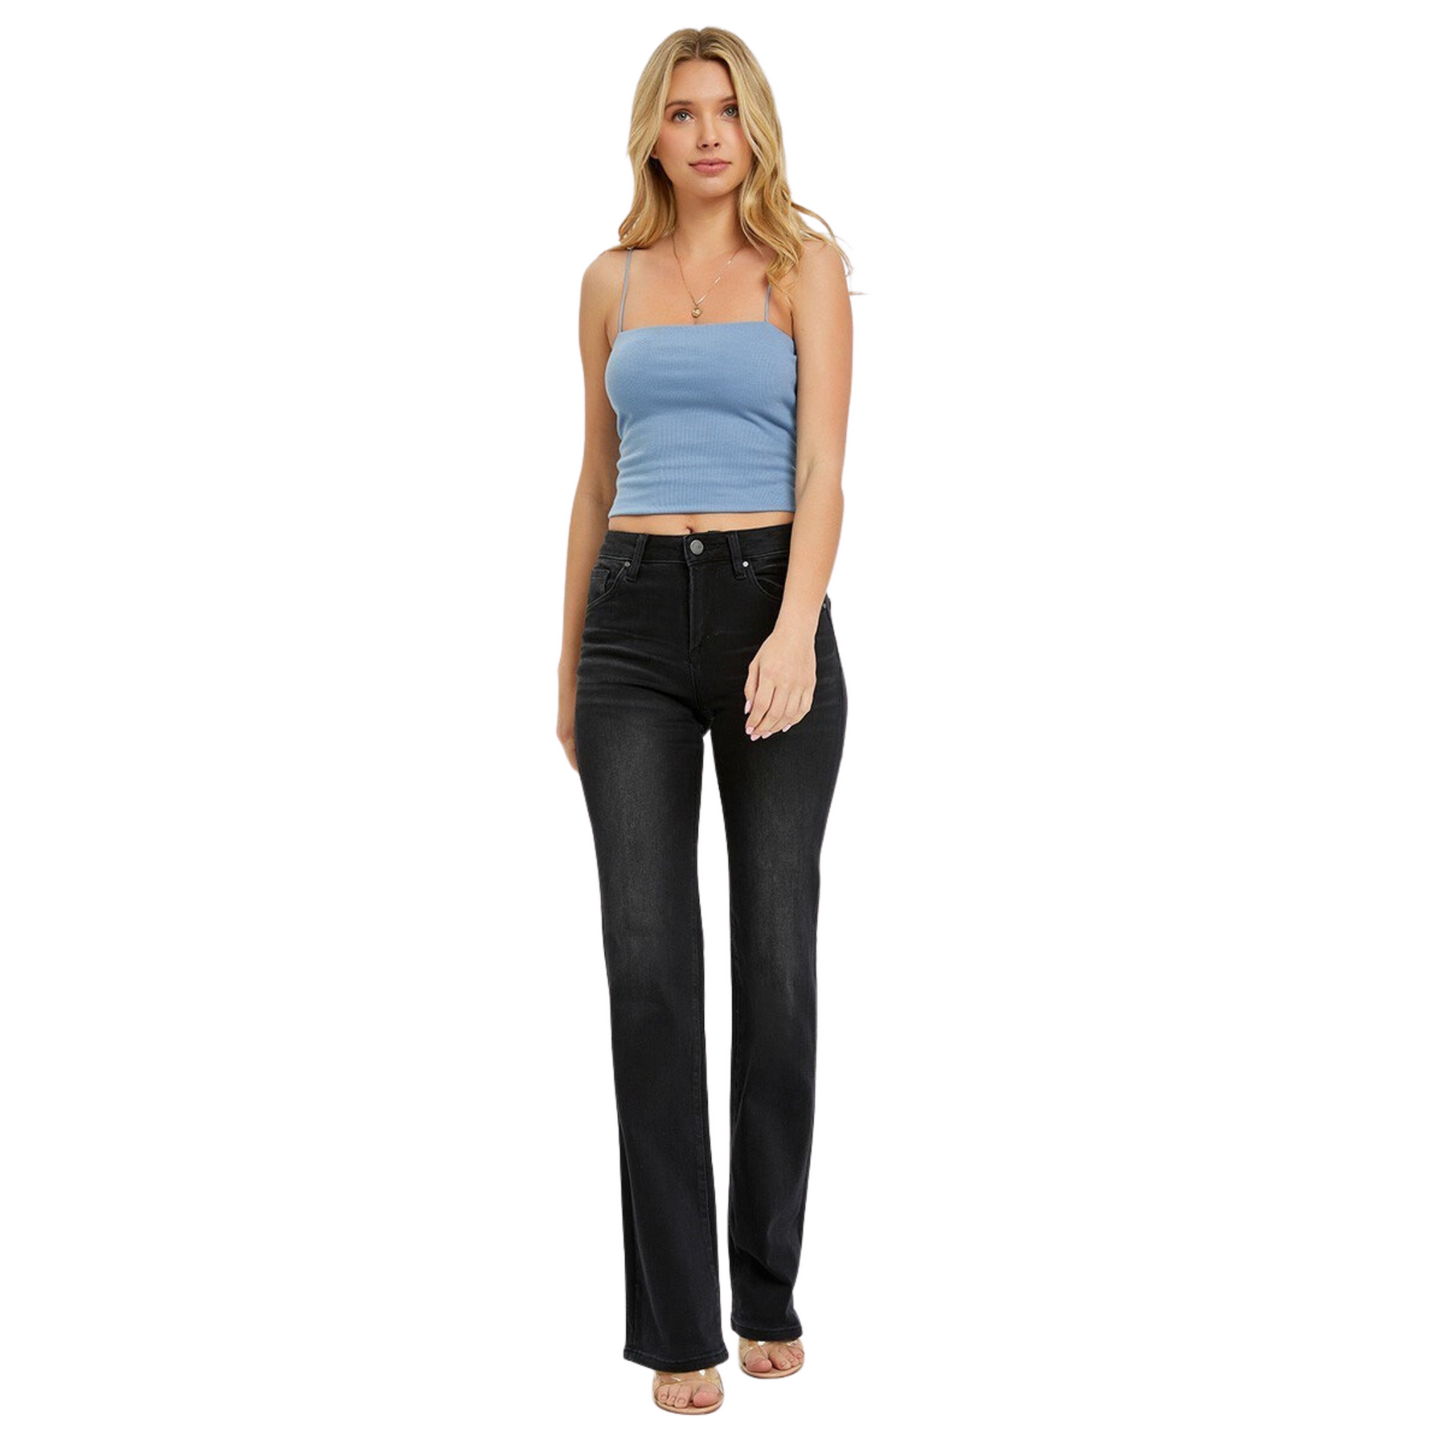 Risen's Mid Rise Slim Straight Jeans combine a classic cut with modern styling. The mid-rise waist enhances comfort and offers a sleek silhouette. In a timeless black color, these jeans can be styled for any occasion.